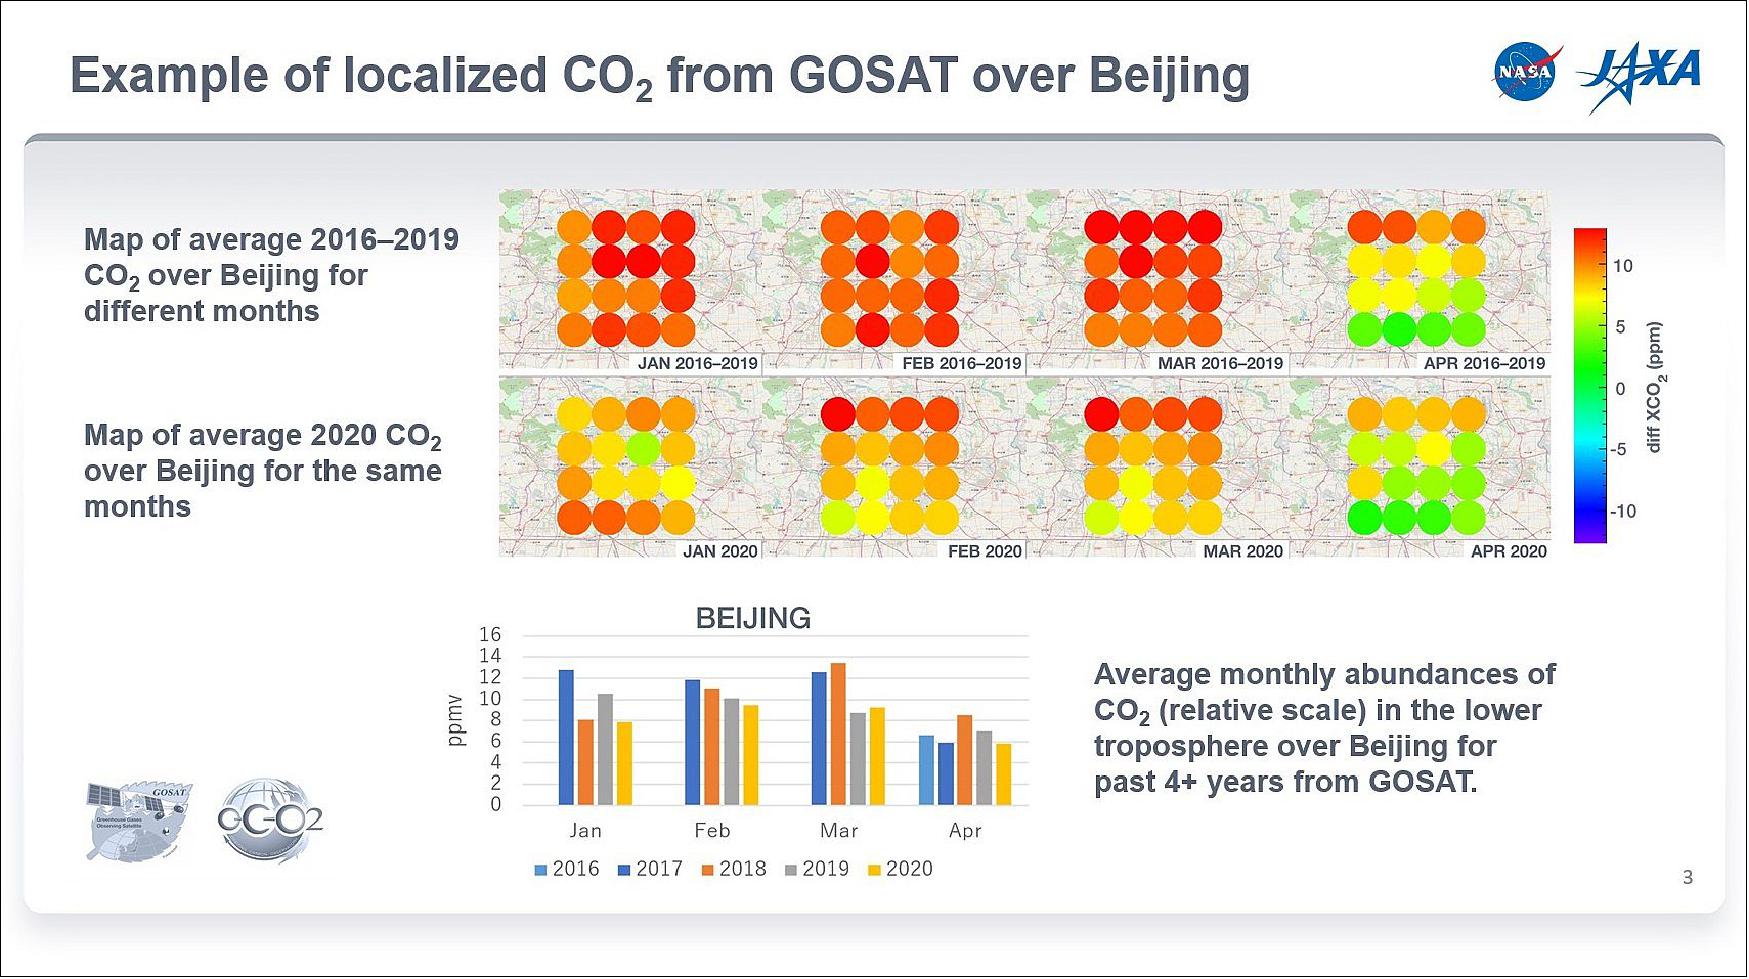 Figure 14: Differences in CO2 concentrations between the lower and upper troposphere derived from the JAXA GOSAT satellite as derived from repeated focused observations over Beijing over the past four-plus years. These plots show that the lower troposphere abundances are lower than prior years through March but they appear to recover in April (image credit: NASA/JAXA, Ken Jucks)